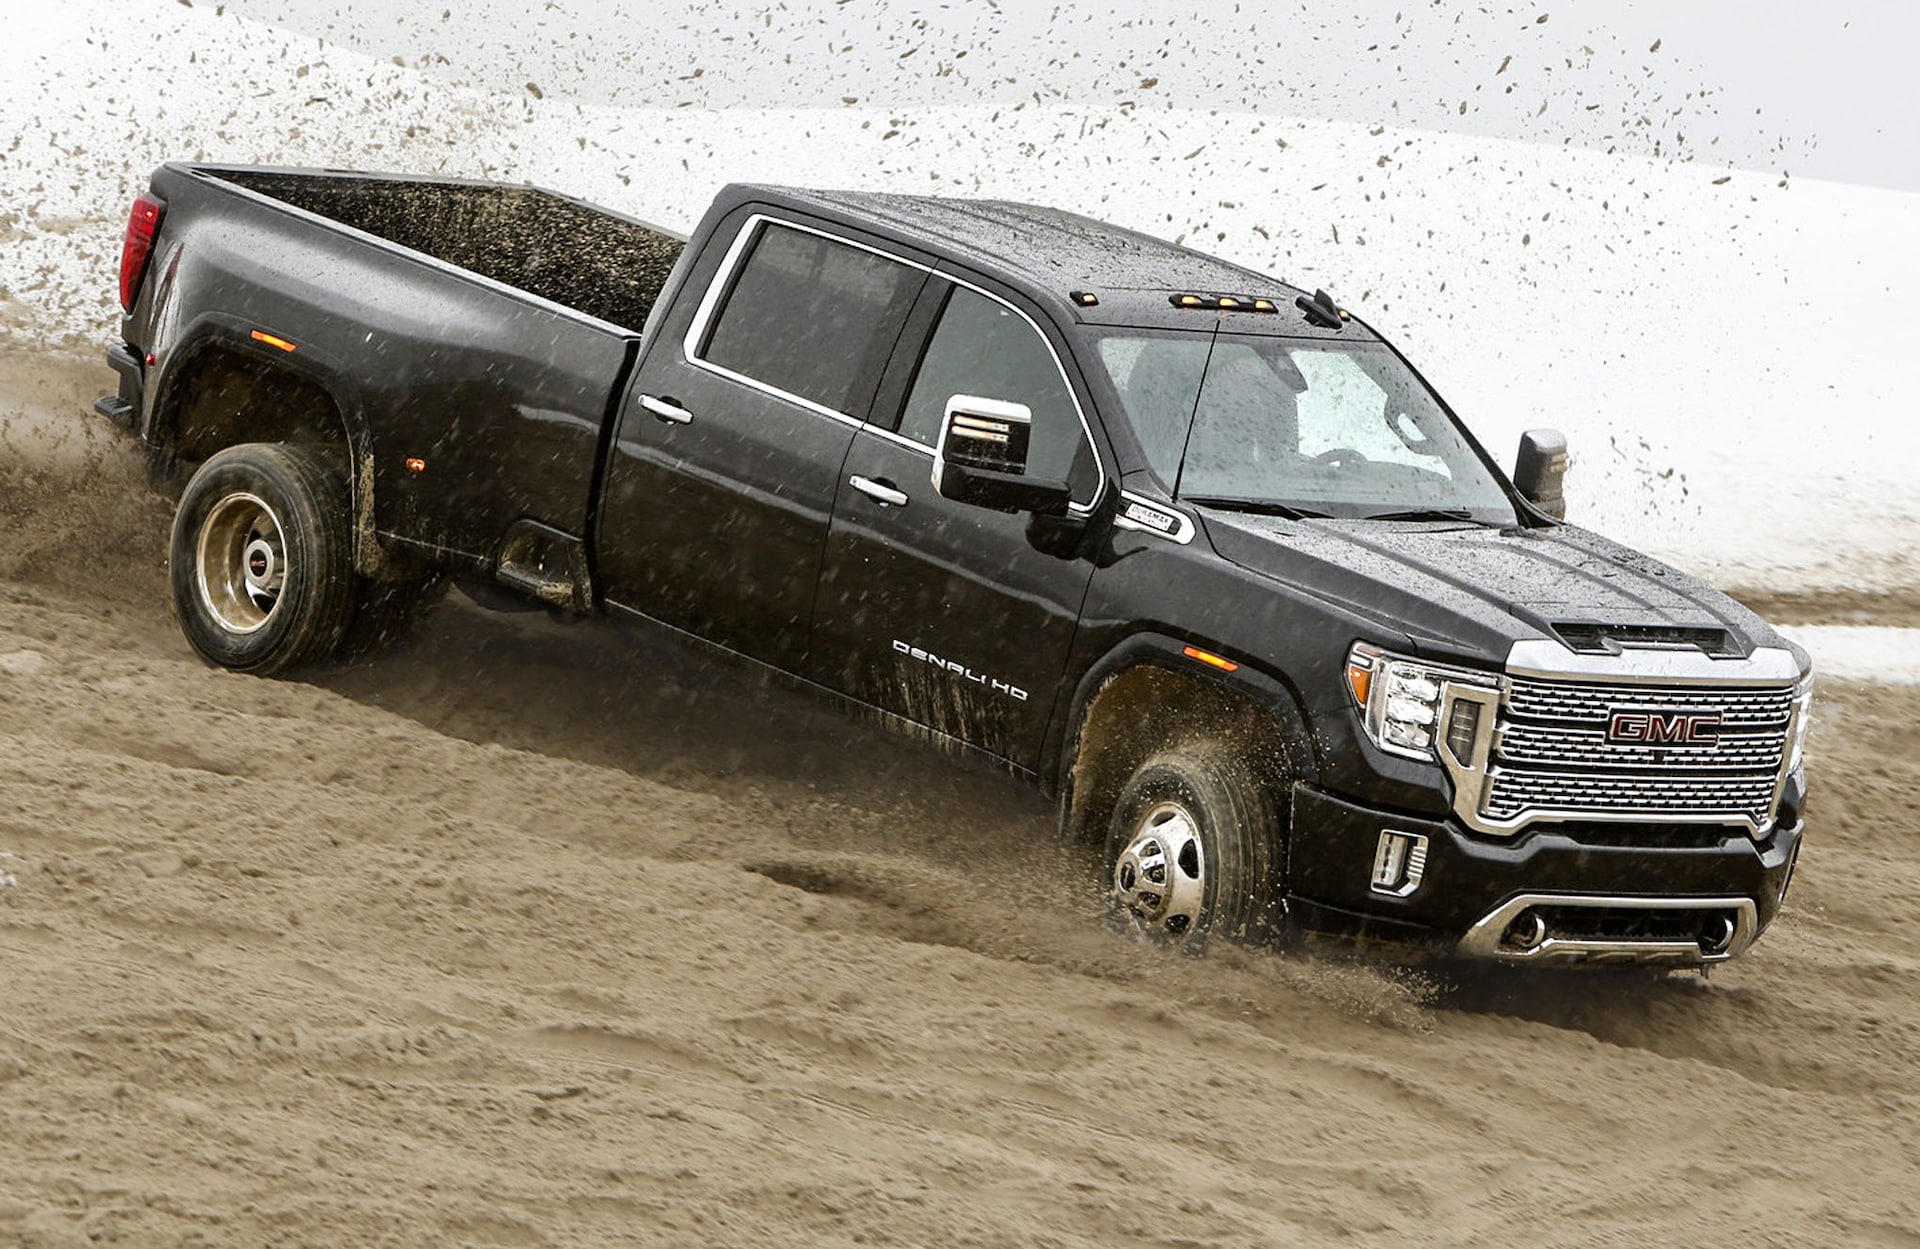 2020 GMC Sierra 3500 HD Denali Duramax: Tested on the Road and Trail